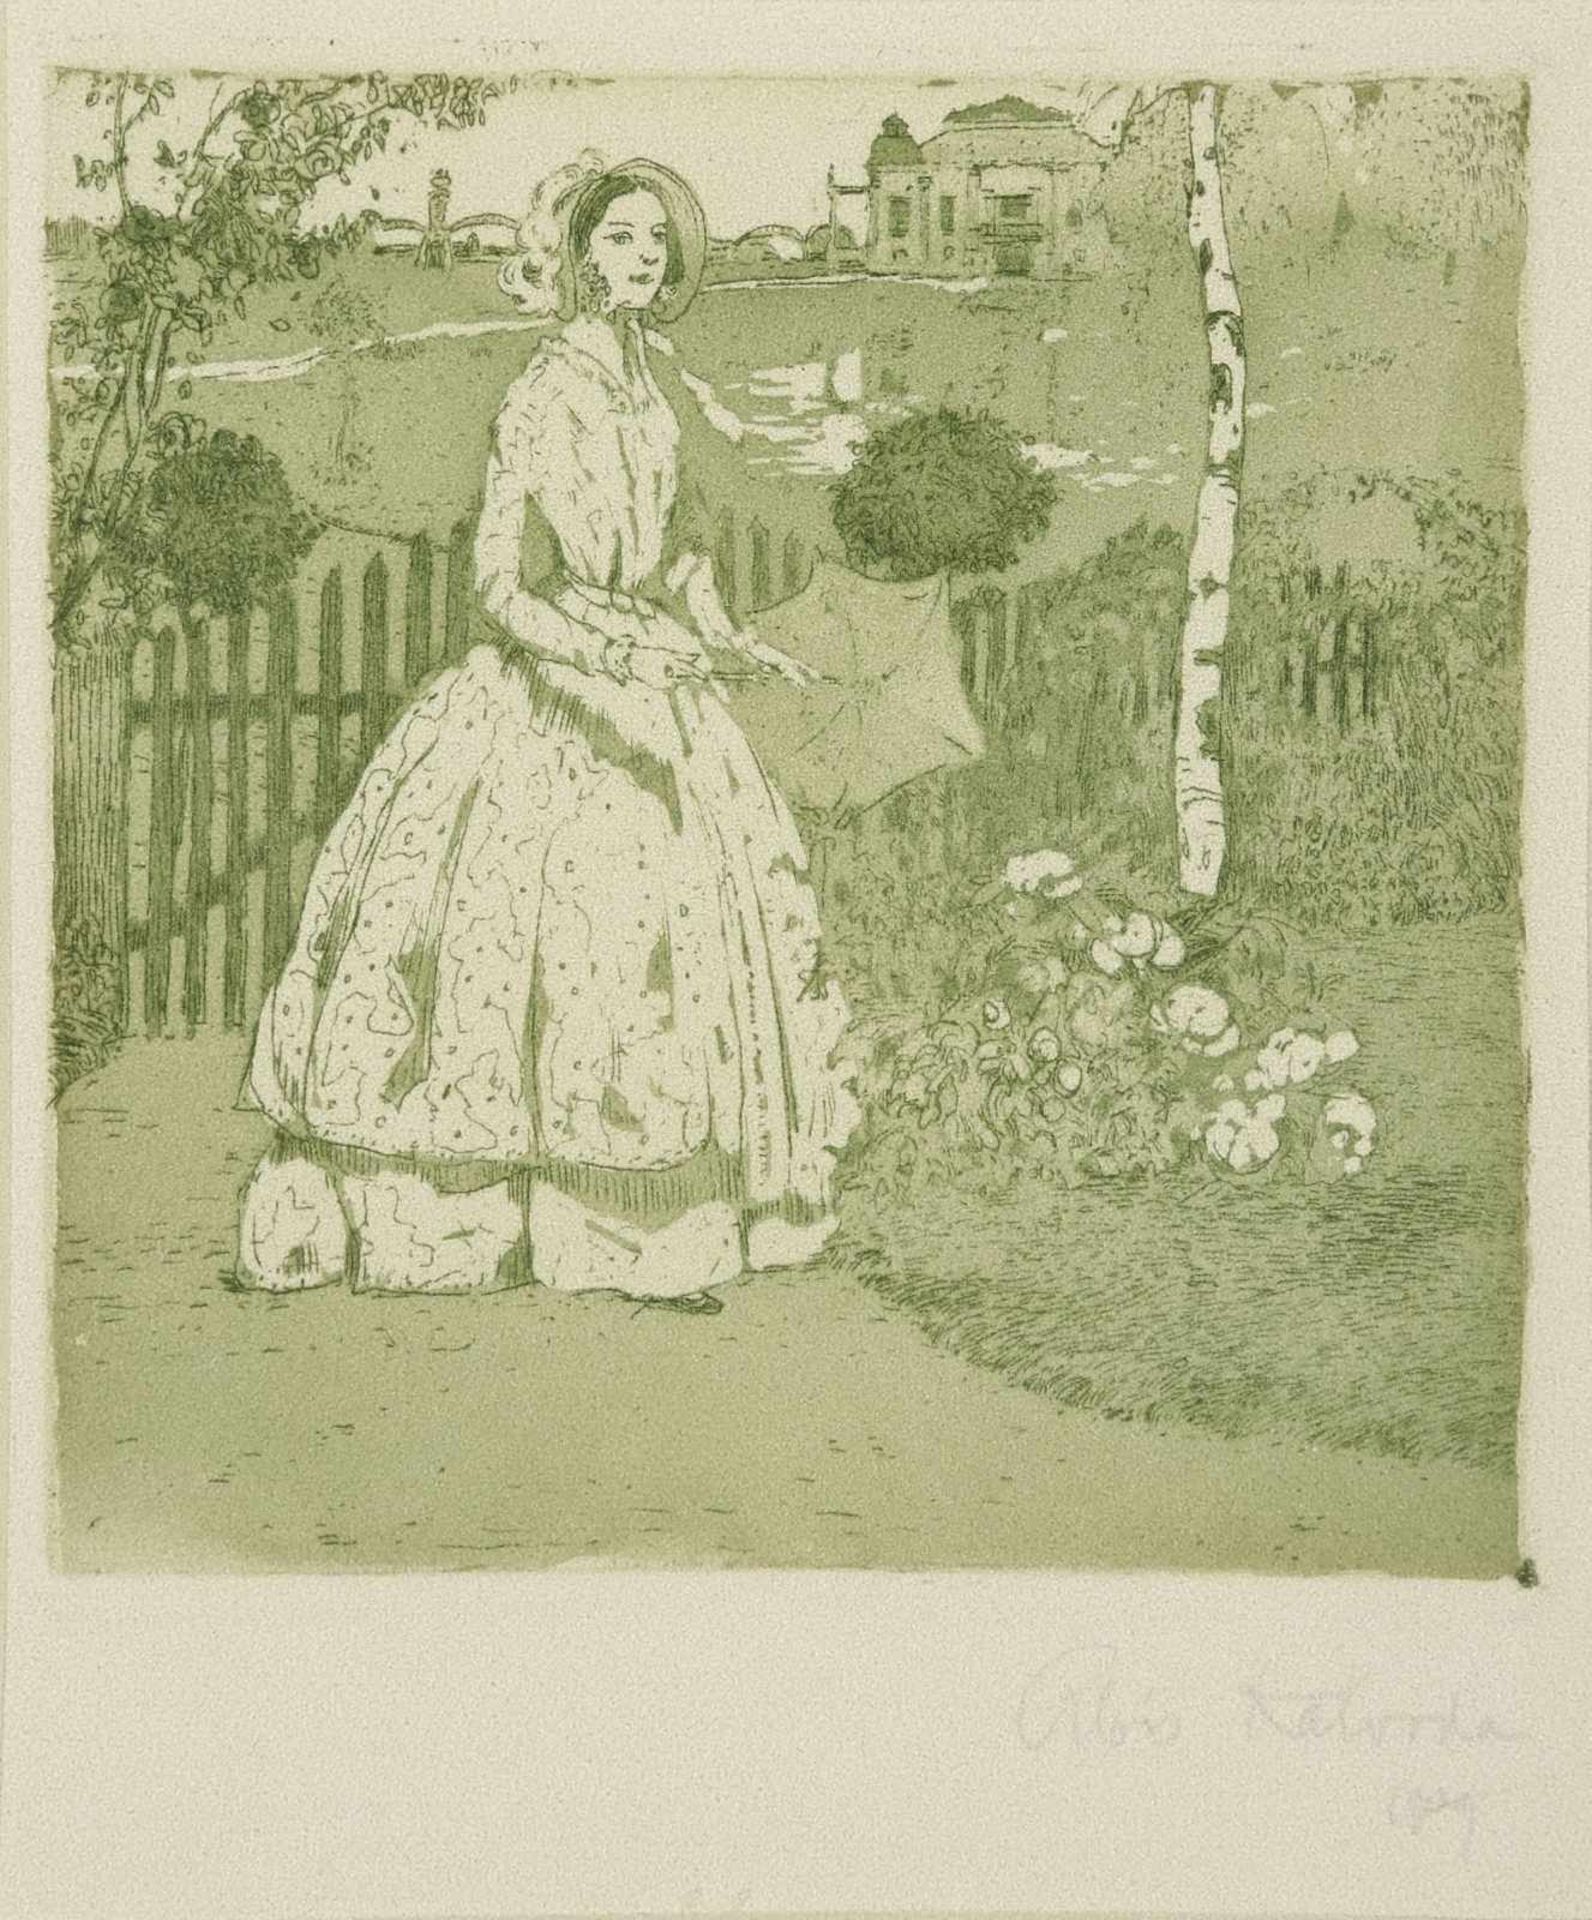 Kalvoda Alois (1875 - 1934) Girl with umbrella, year 1909, etching and aquatint on paper, 15 x 14,